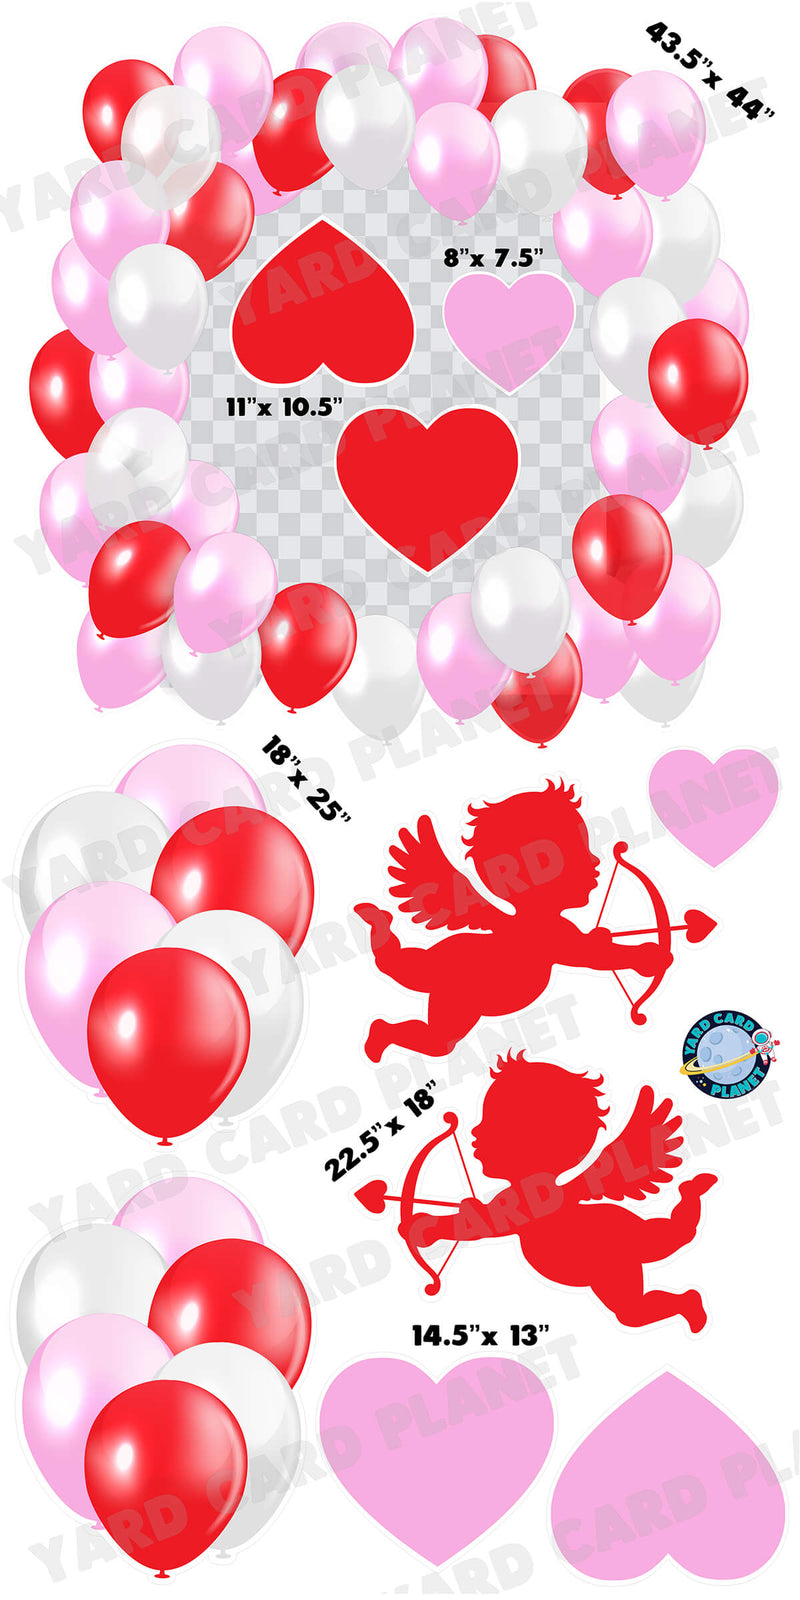 Hearts and Cupid Valentine Balloons Photo Frame and Bouquets Yard Card Set with Measurements